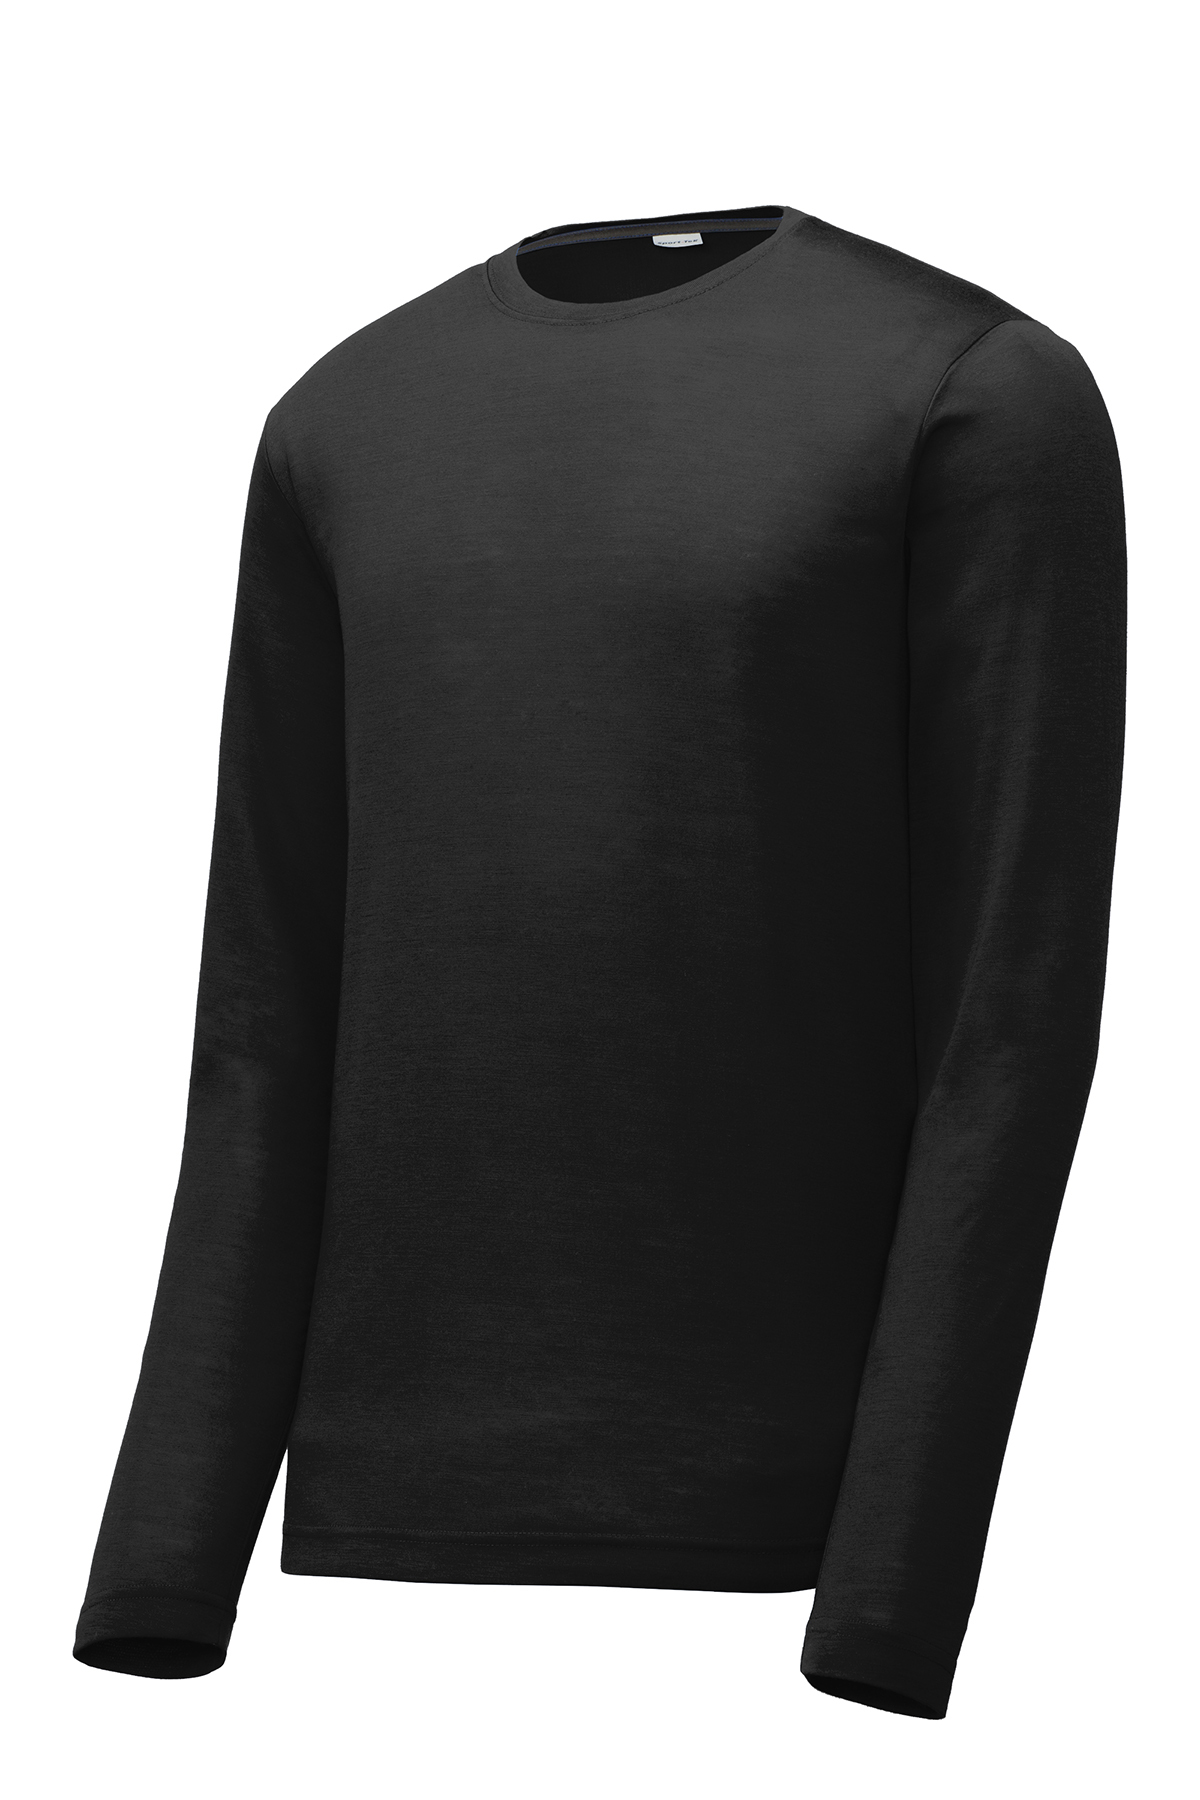 Sport-Tek Long Sleeve PosiCharge Competitor™ Cotton Touch™ Tee | Product |  Sport-Tek